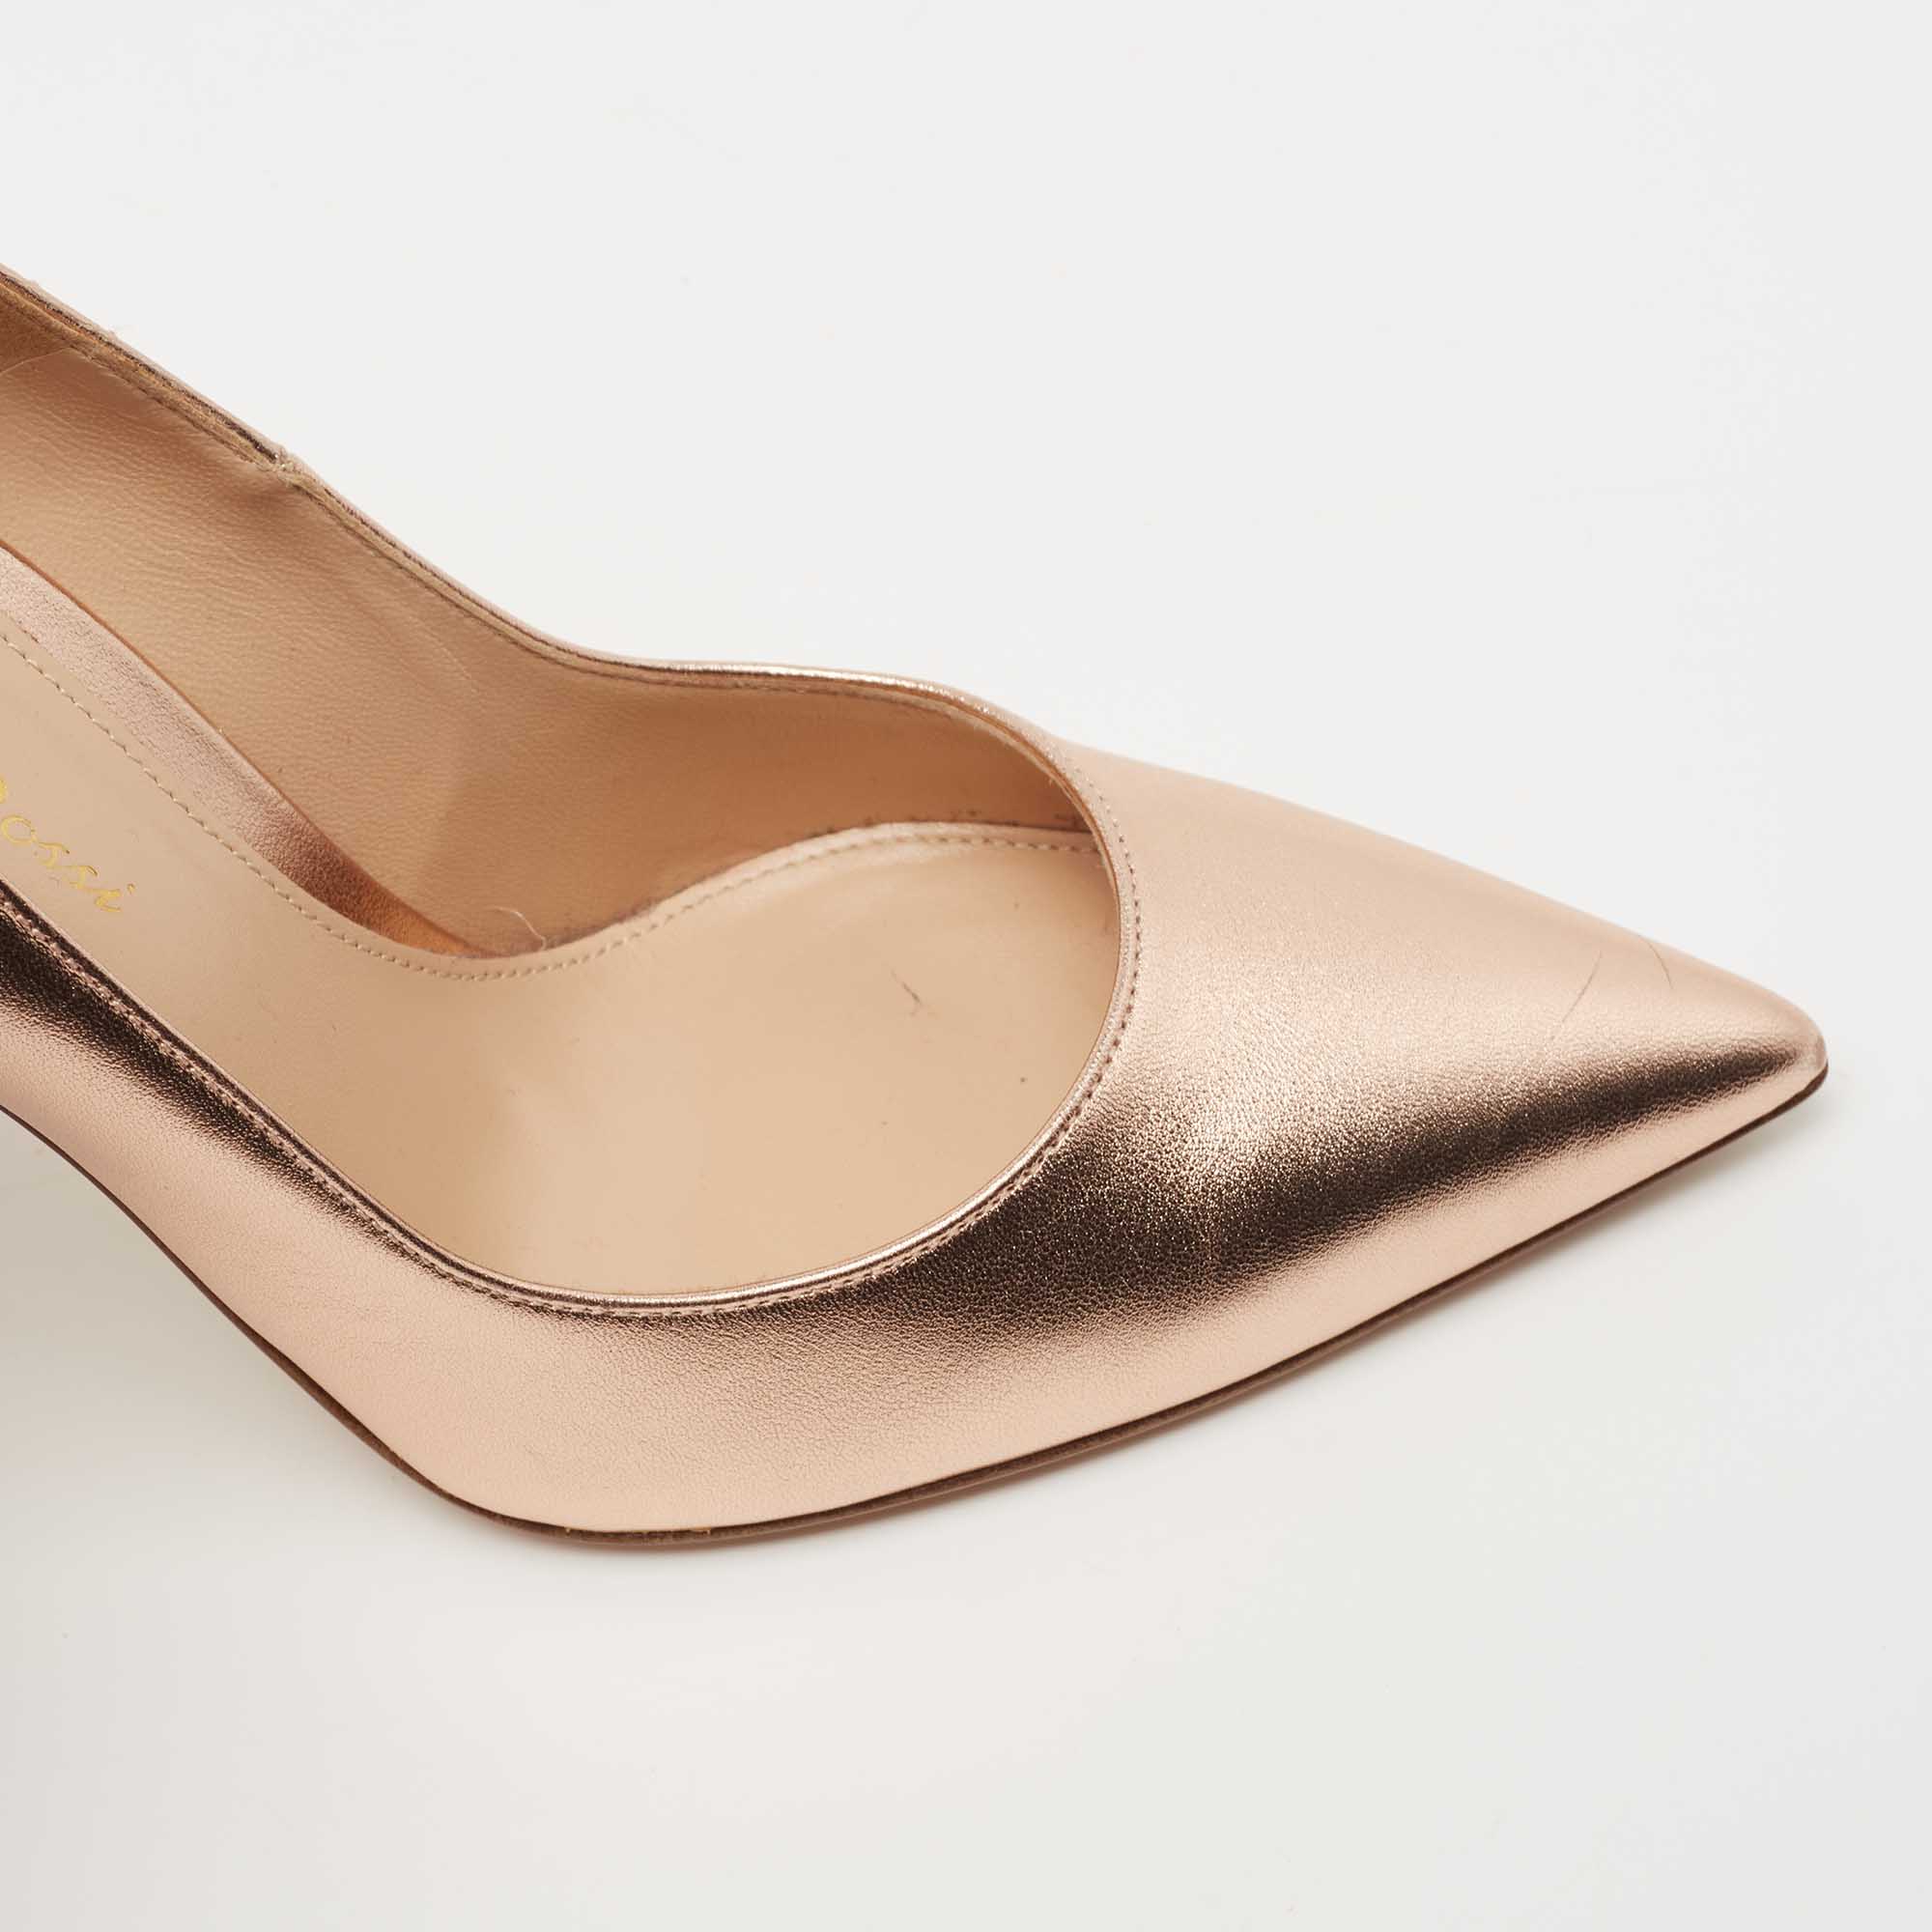 Gianvito Rossi Metallic Bronze Leather Pointed Toe Pumps Size 36